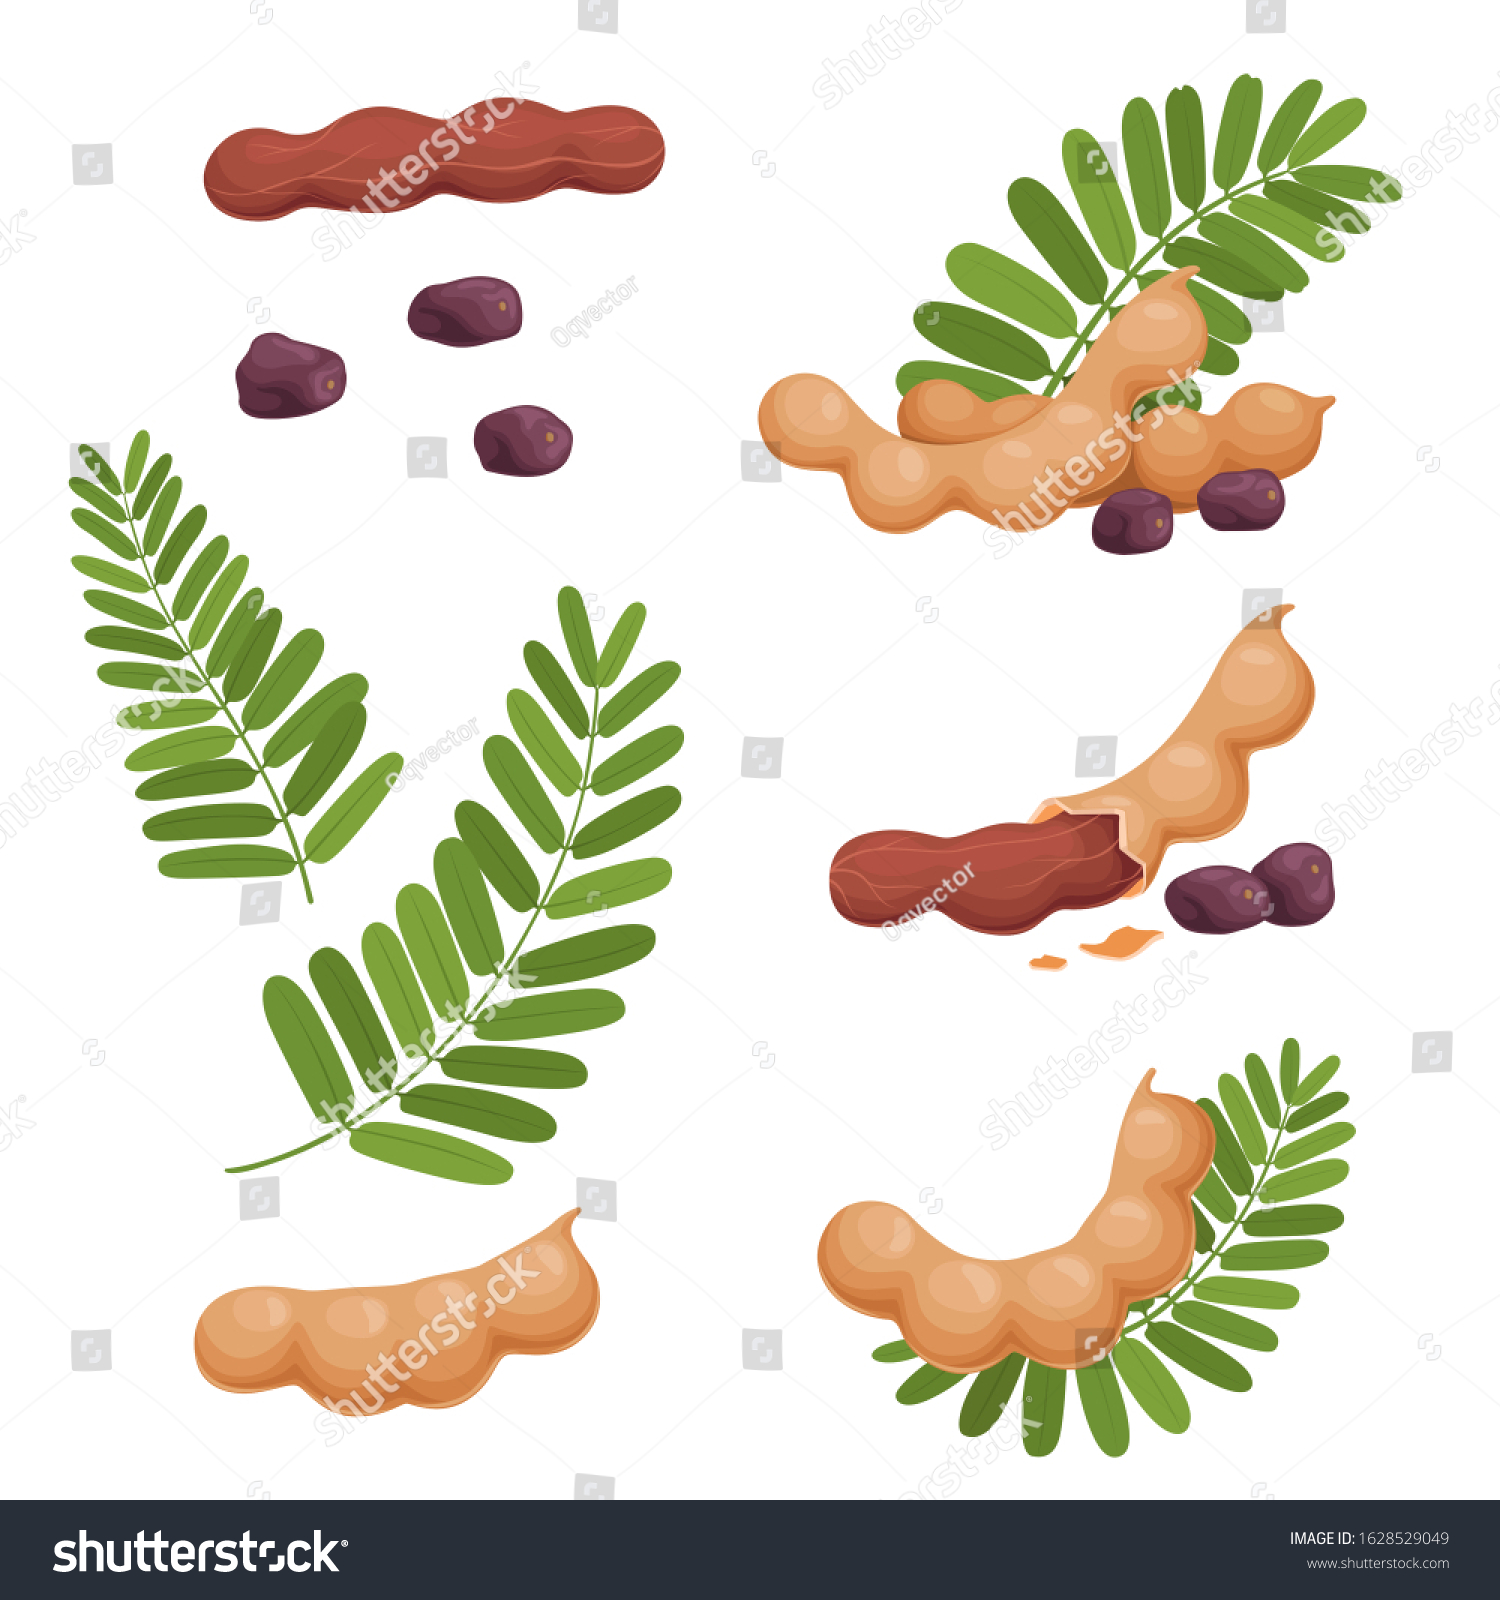 A set of seeds of fruits and leaves of tamarind. Illustration of a fresh, ripe tamarind #1628529049